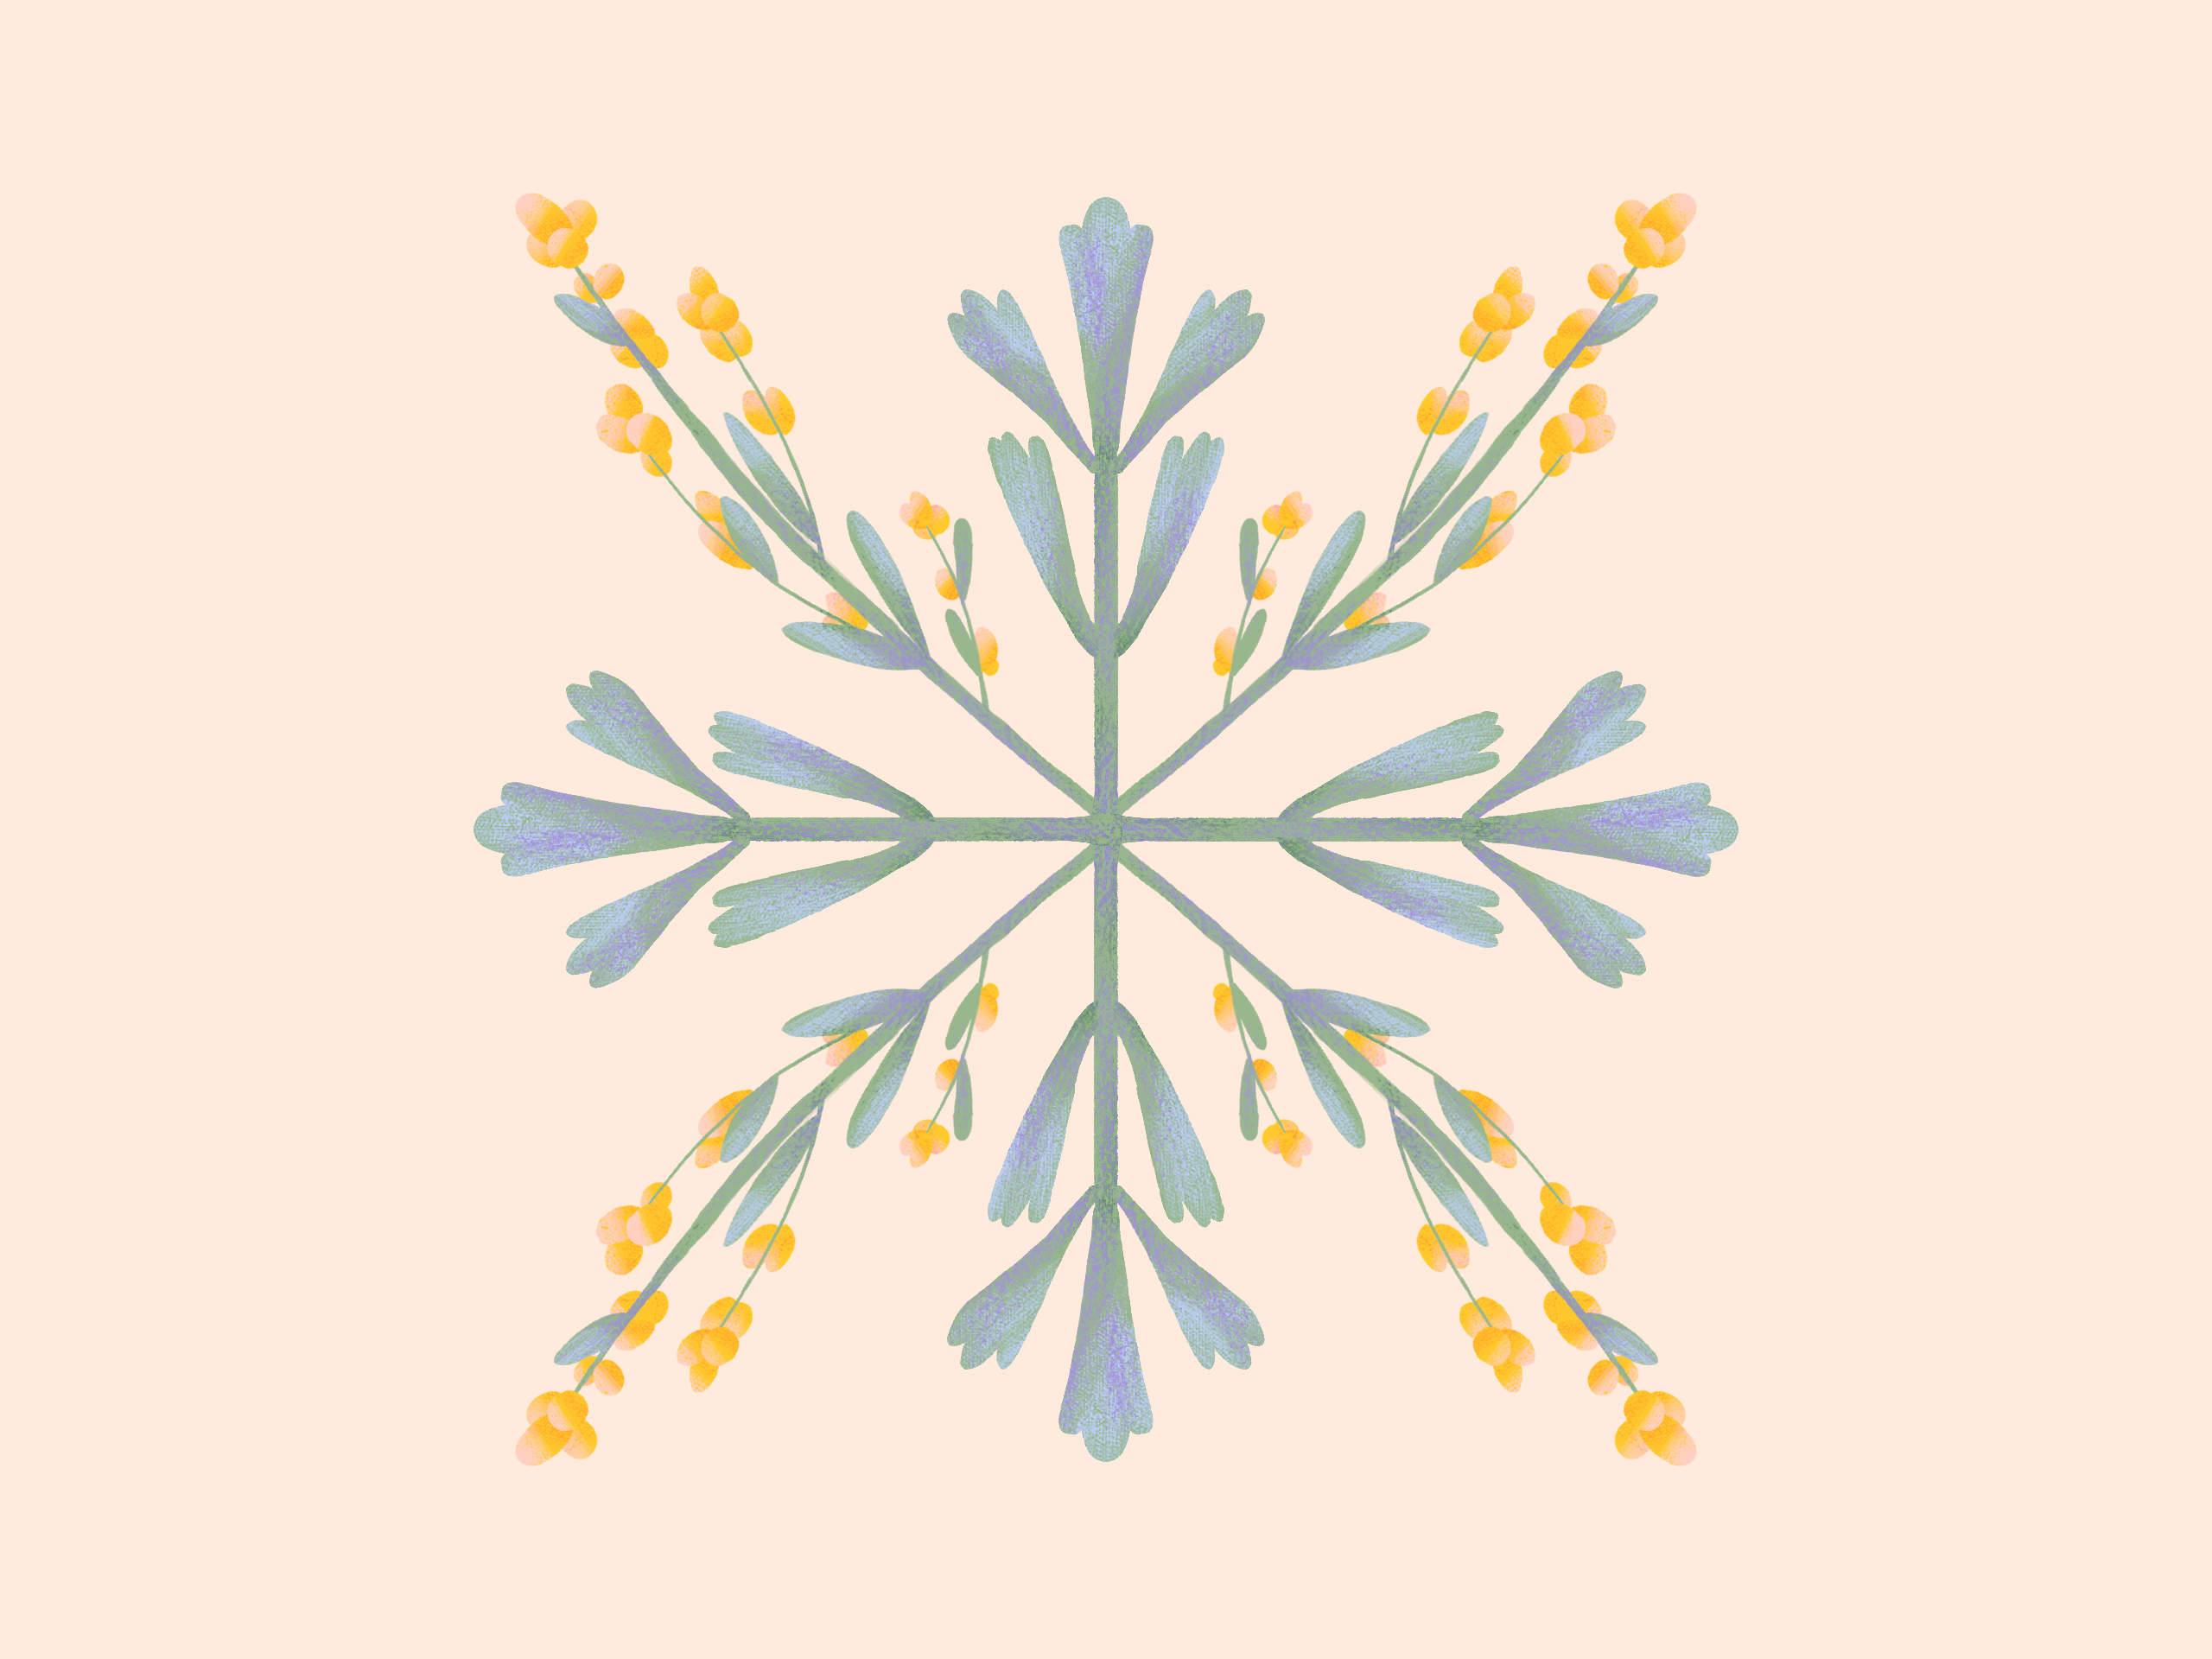 Image: A crystalline structure like a snowflake or a compass, with orange flowers coming out from the hybrid directions and green leaves coming out from the cardinal directions. Illustration by Kiki Lechuga-Dupont.